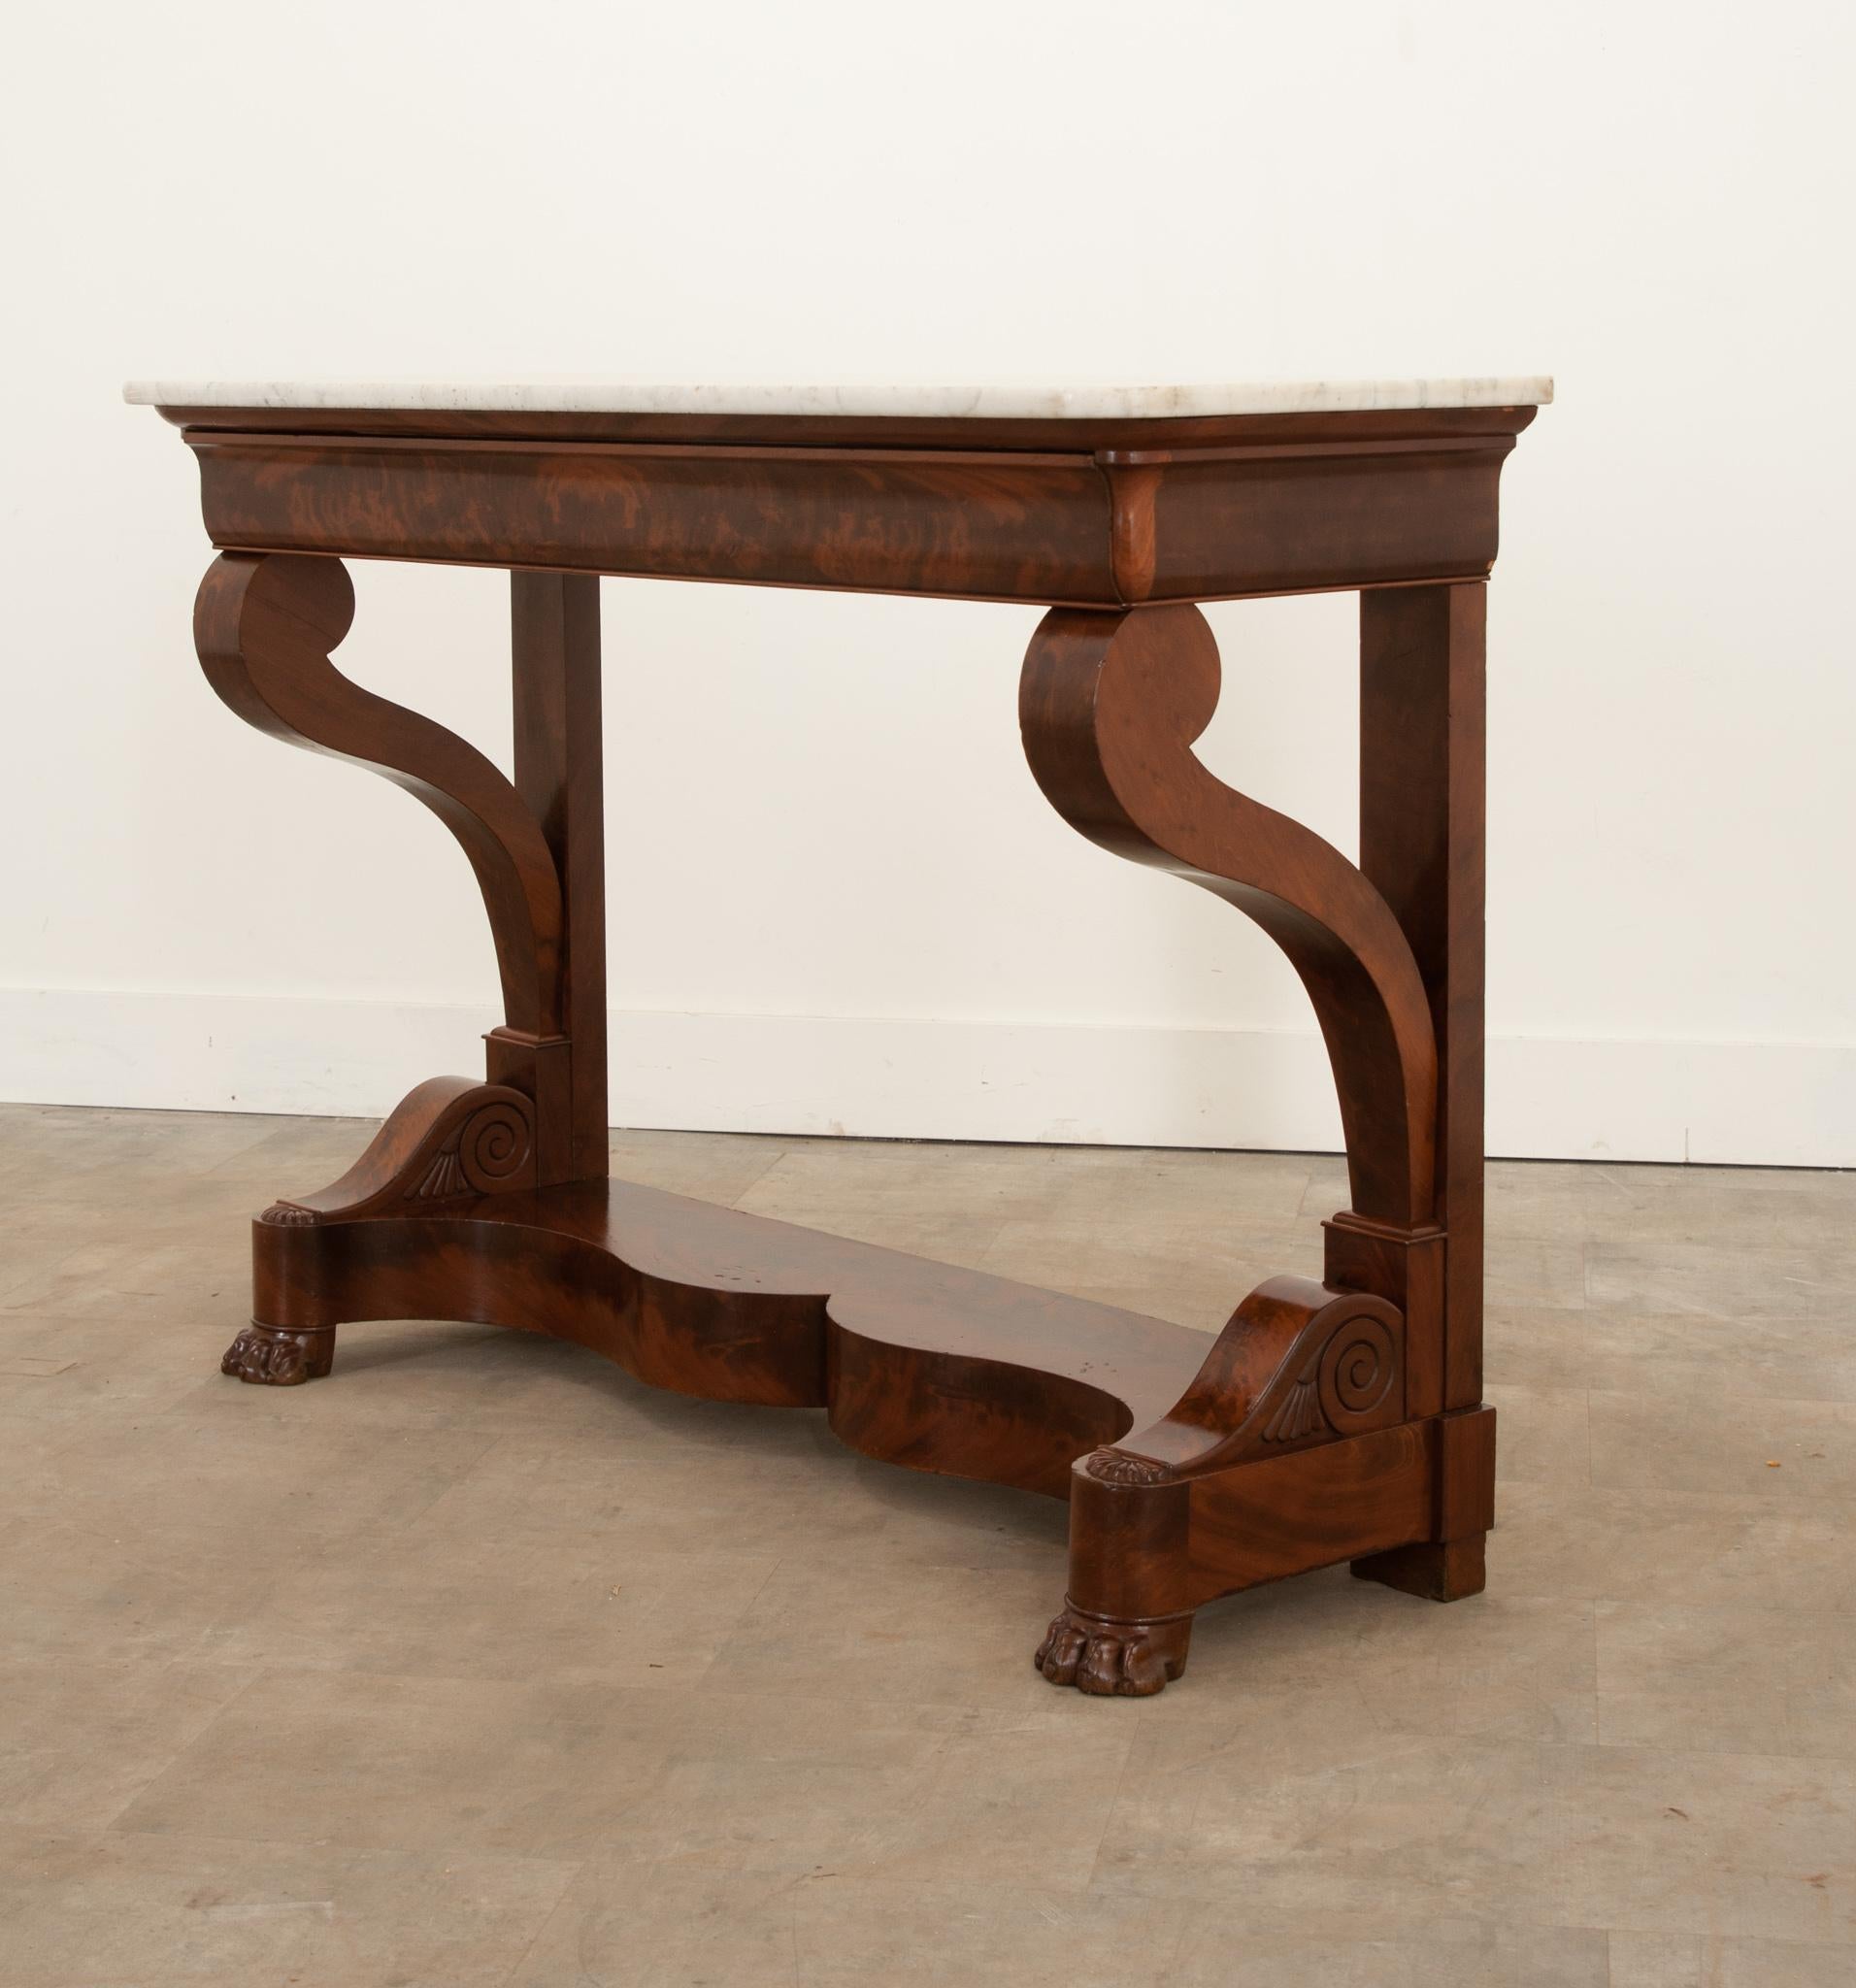 A great French mahogany console from the 1830s. The original white marble top elegantly cantilevers over its base and is Classic of the Restoration style. The entire design of this table has a hint of whimsy all the way down to the paw feet and